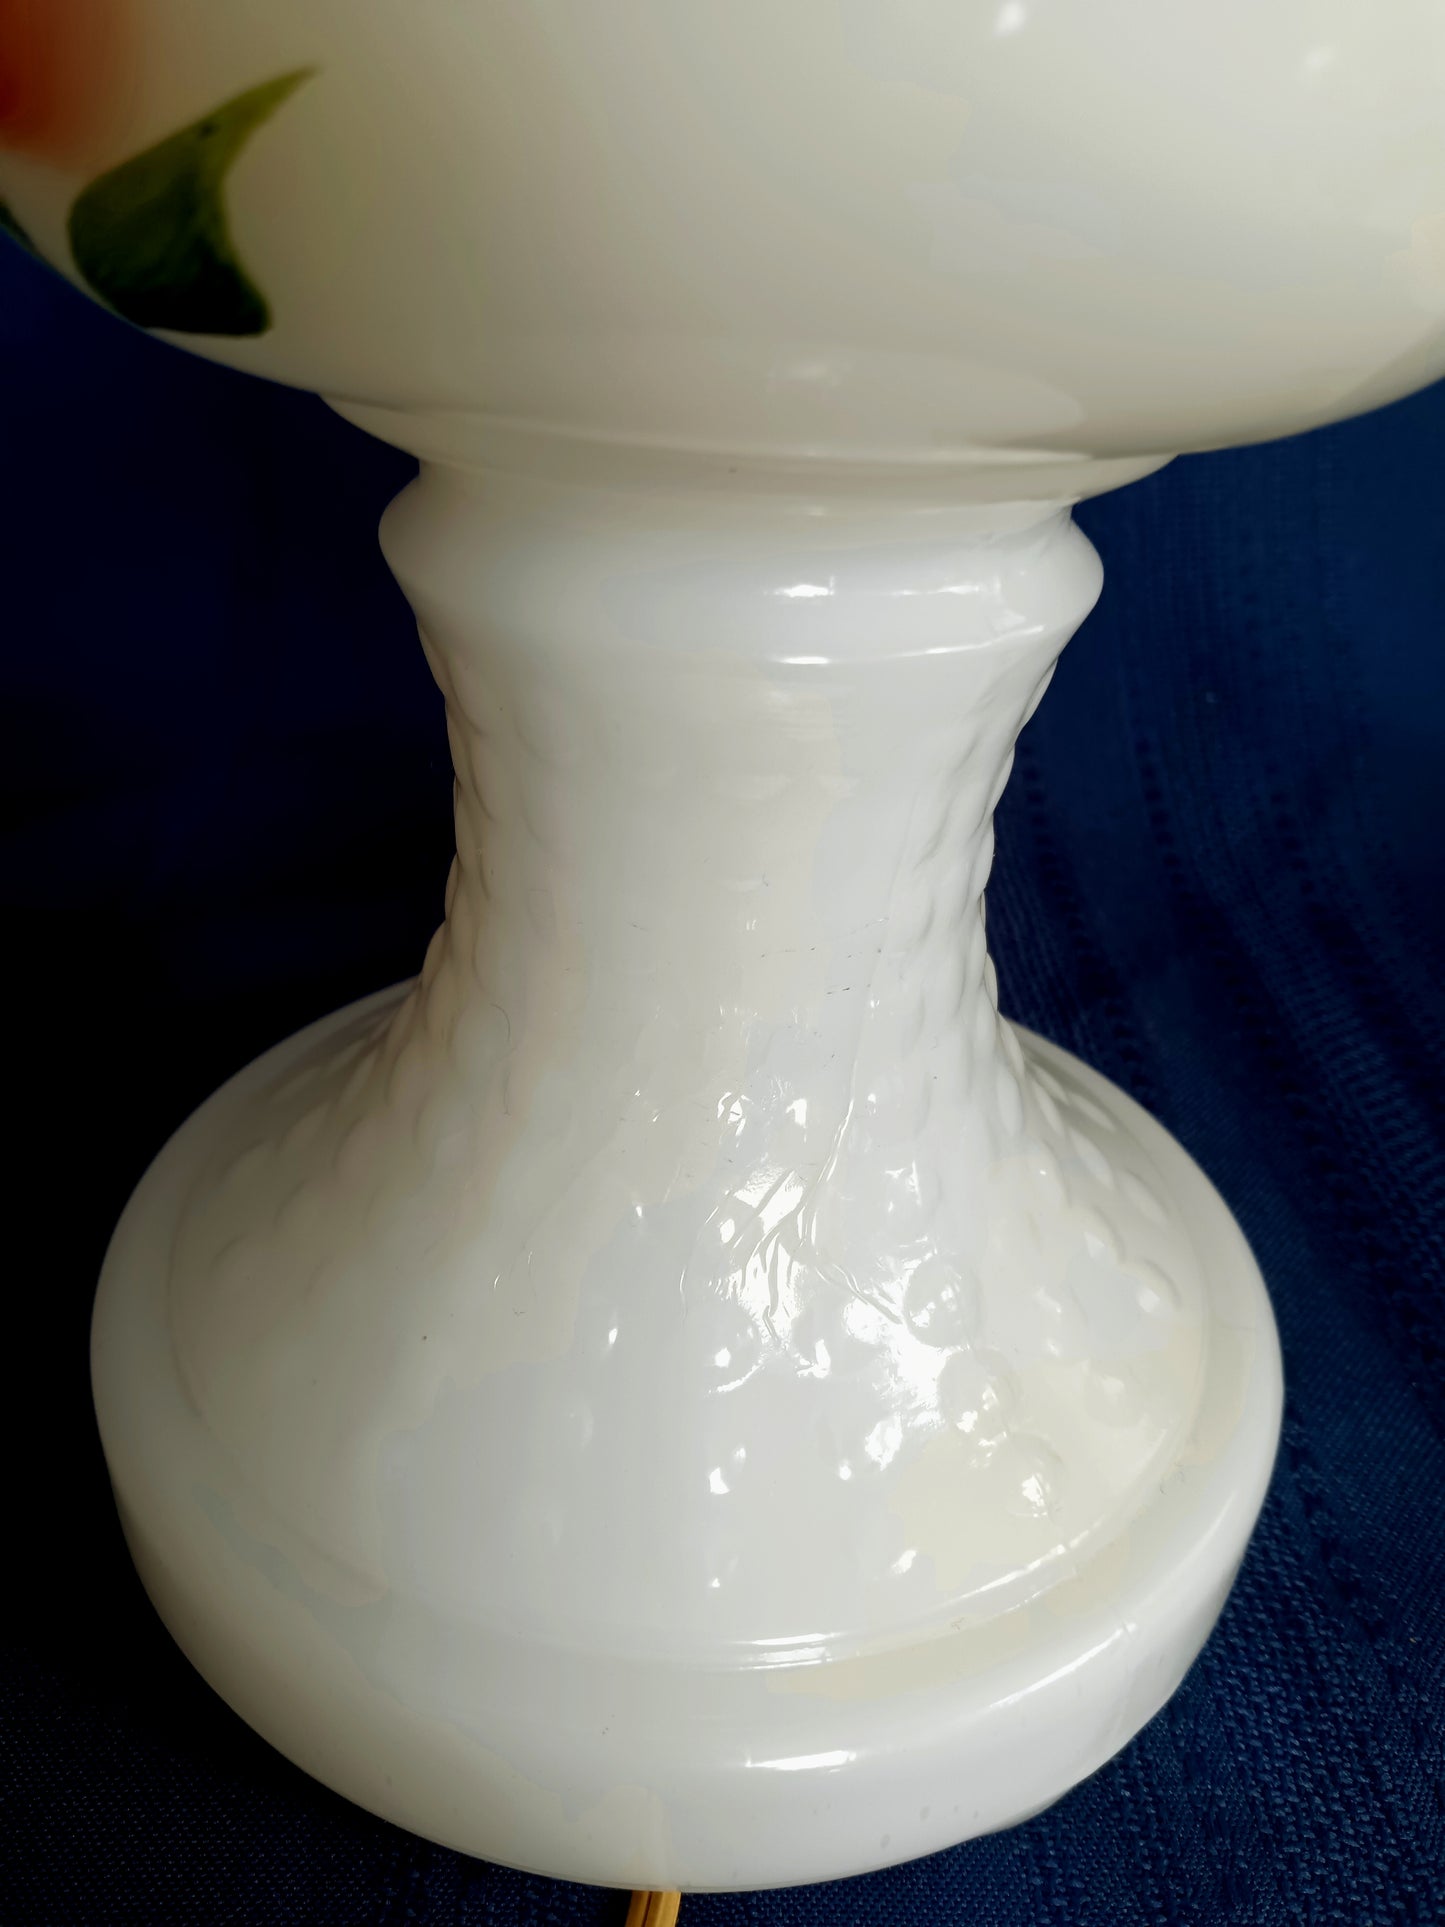 Vintage Milk Glass Hurricane Electric Lamp Footed Base Painted Red Rose Flowers Chimney Shade Bedroom End Table Lamp Country Décor